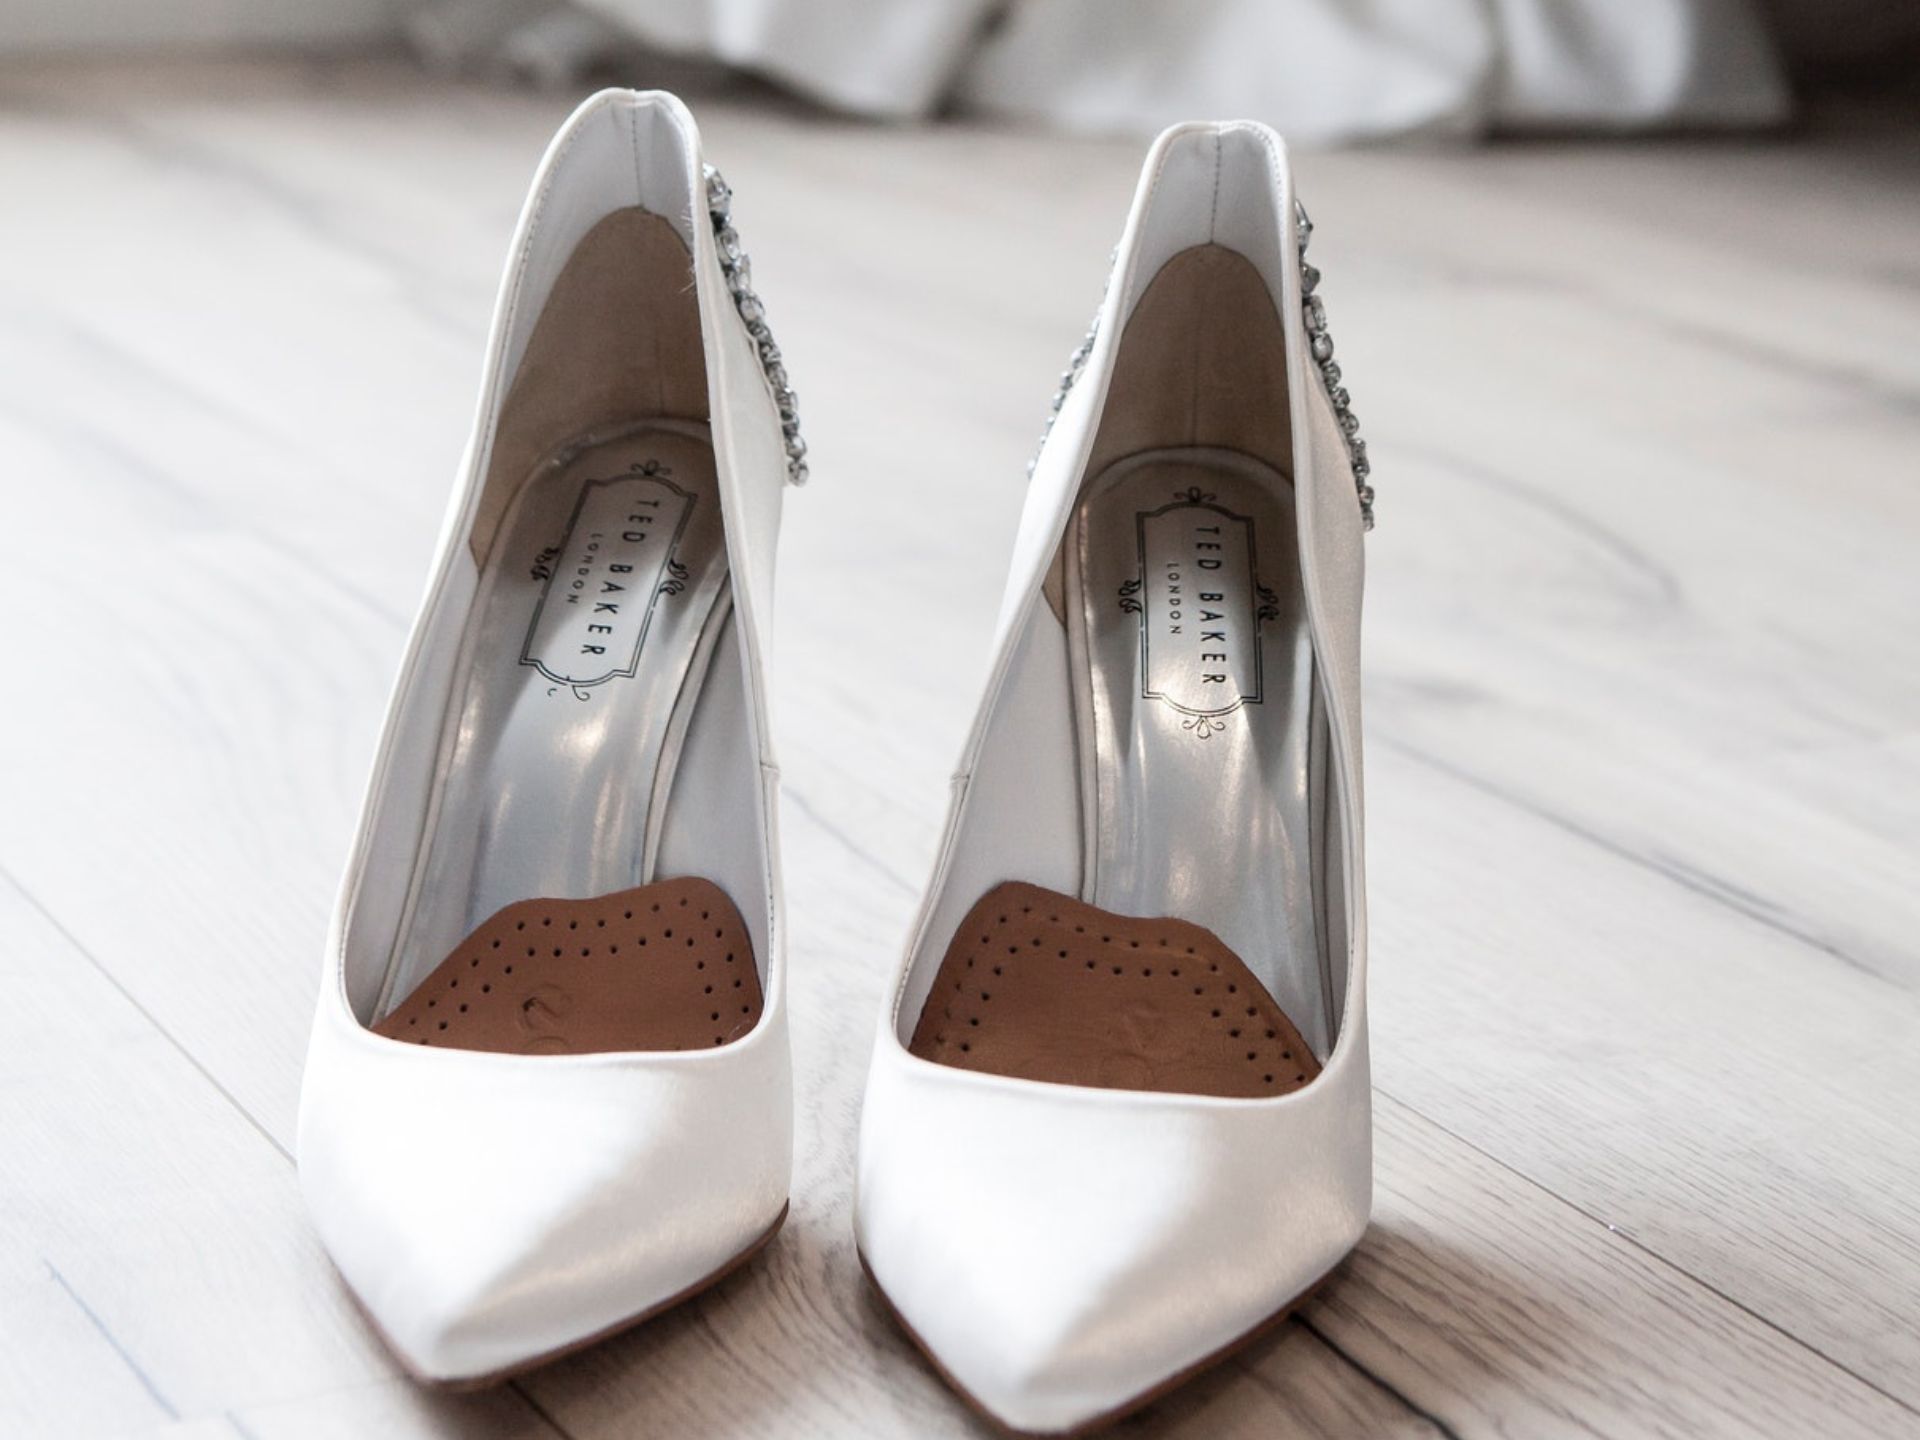 A bride's white heels on a wooden floor.